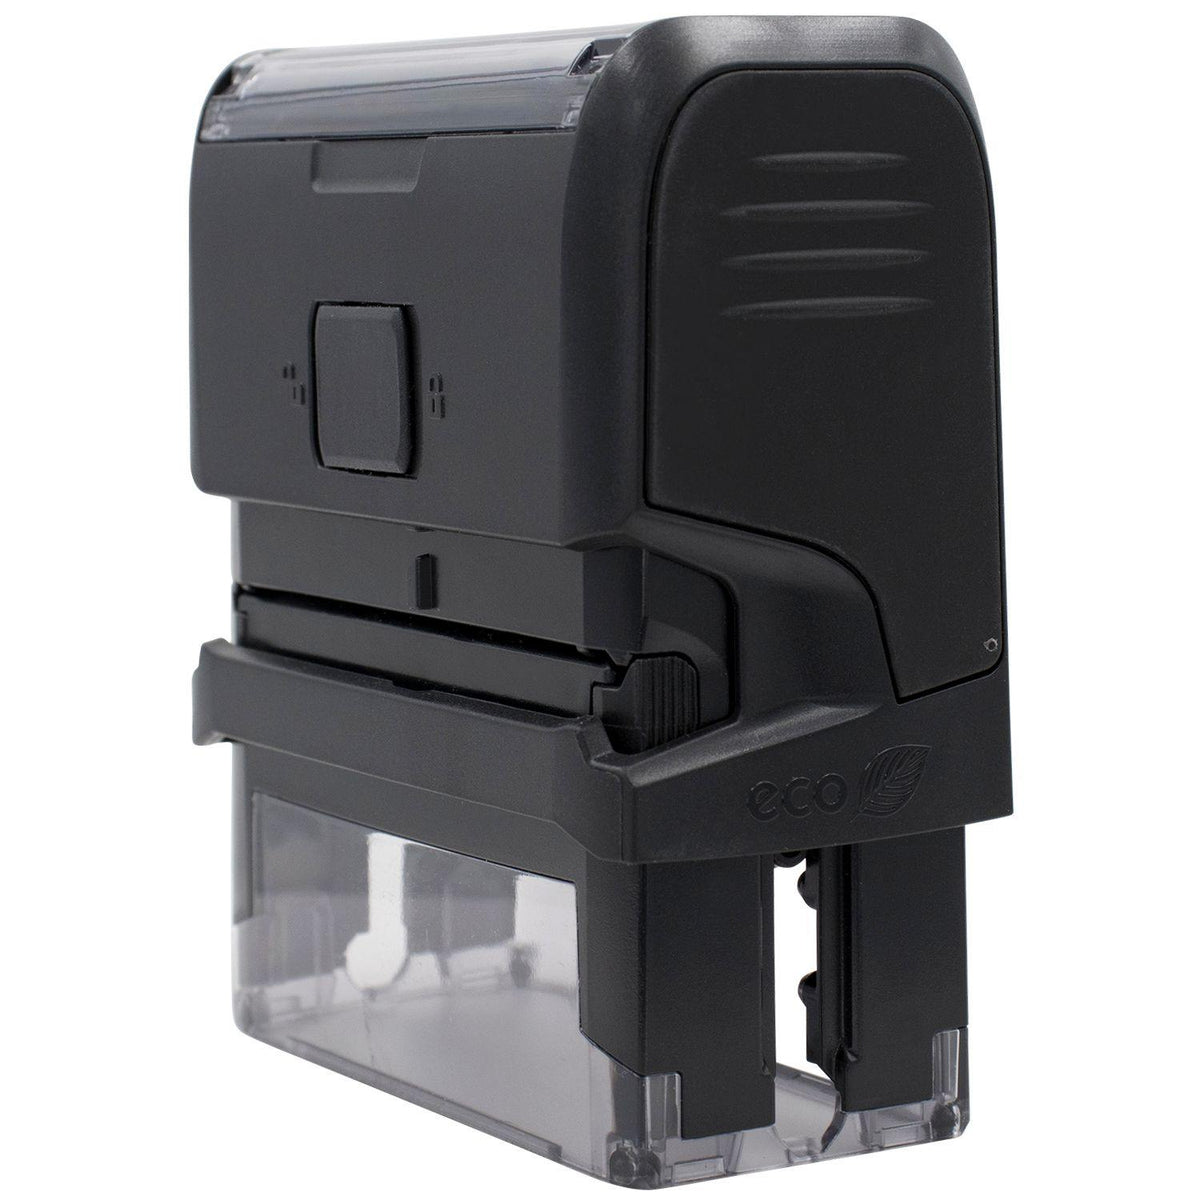 Side View of Large Self-Inking Bold Fragile Stamp at an Angle